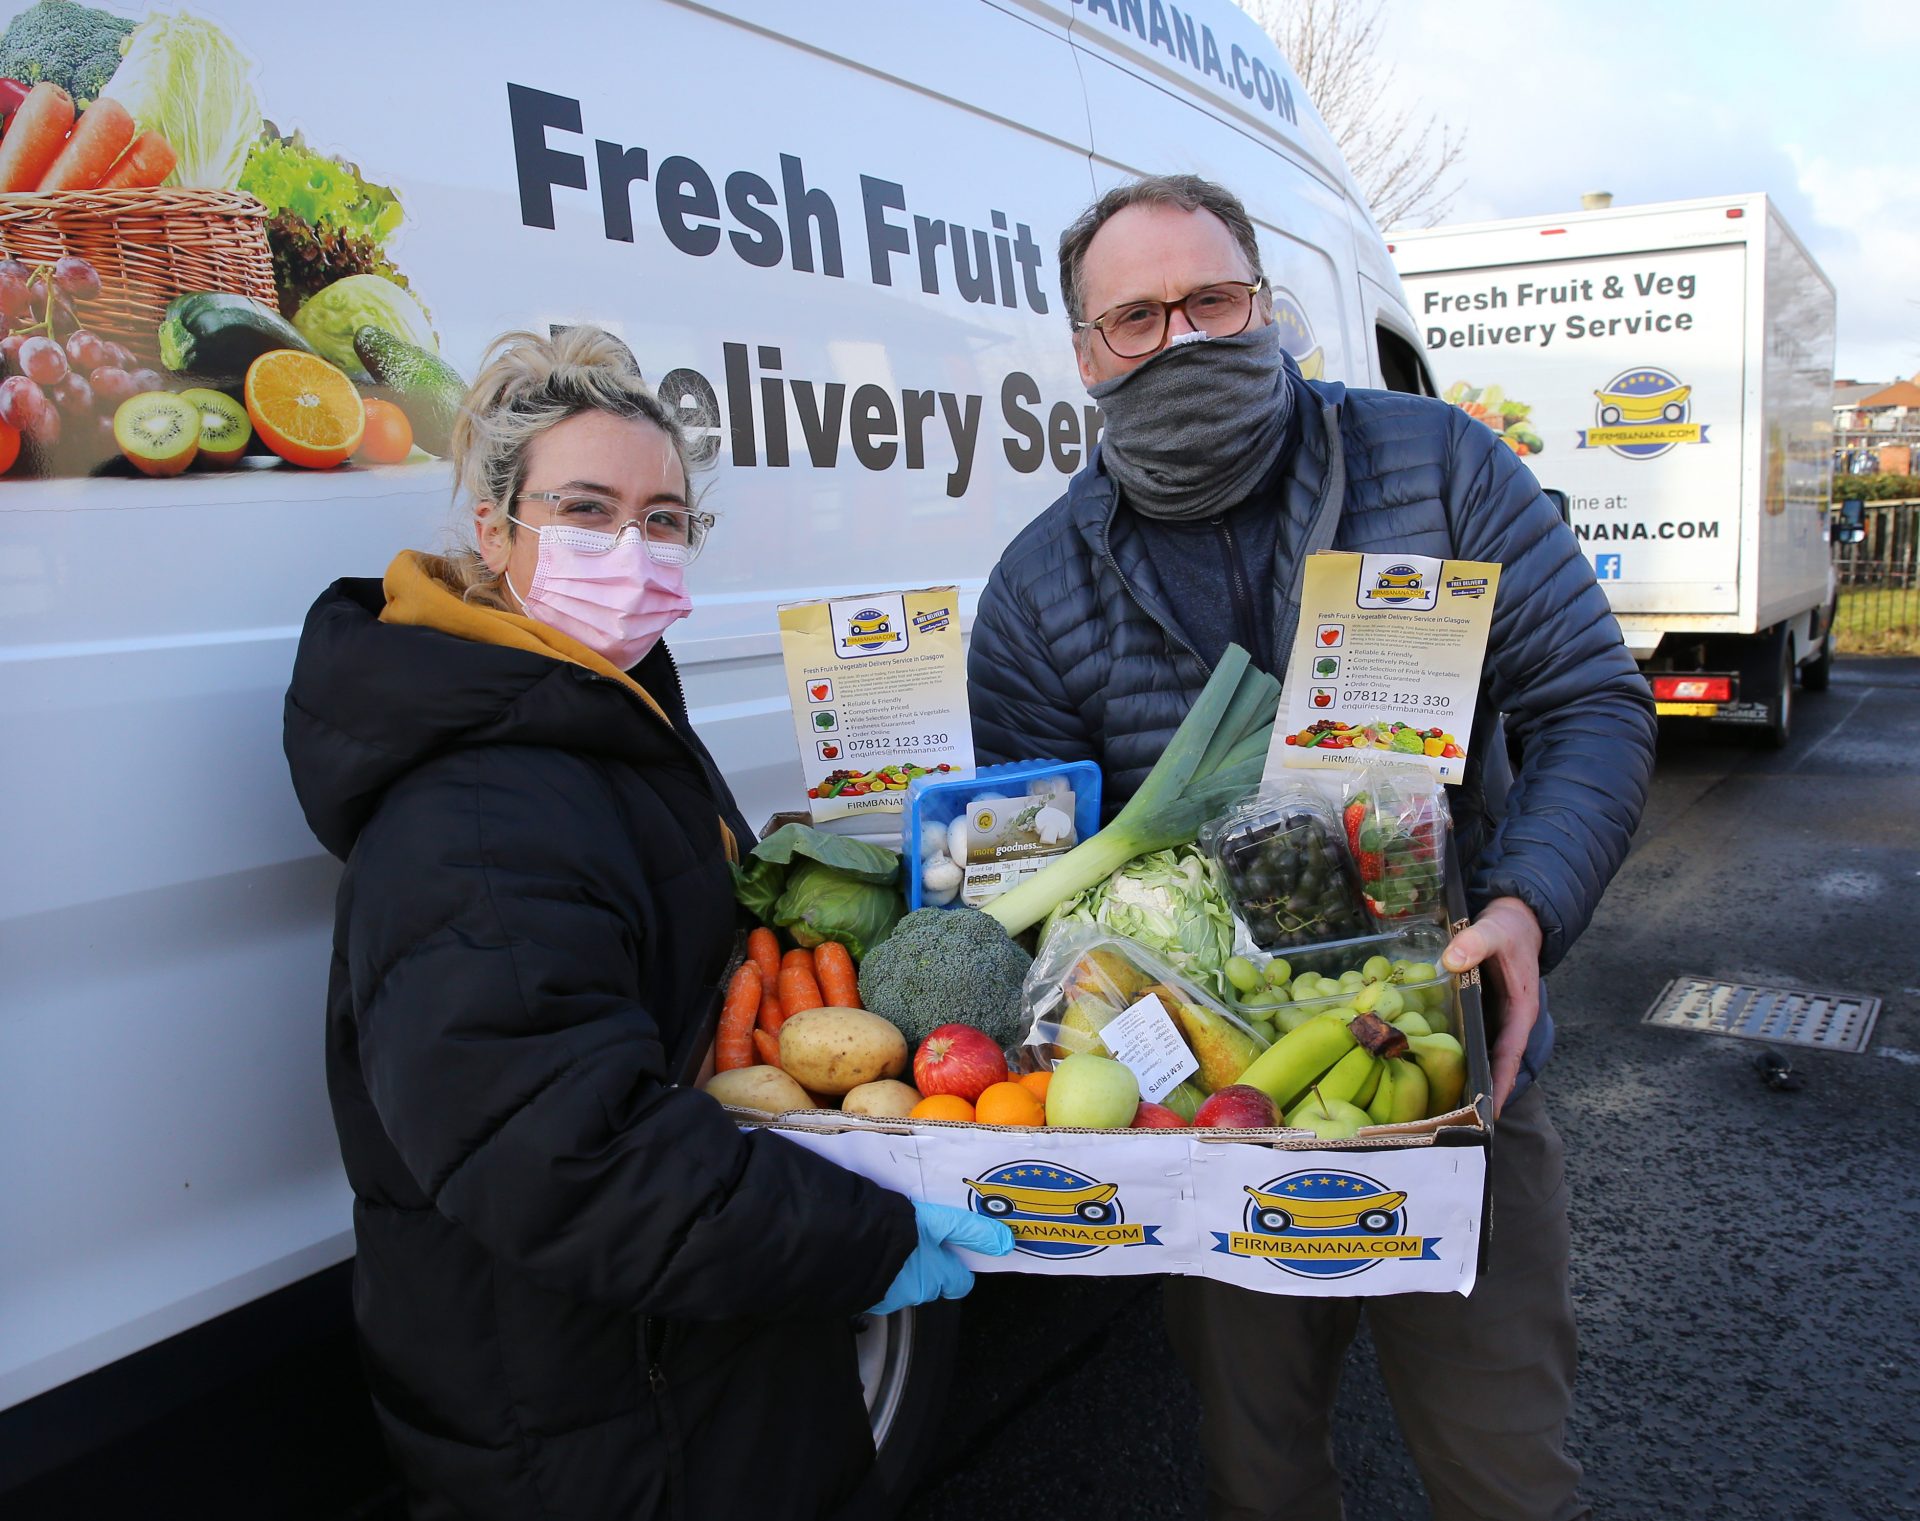 Glasgow fruit and veg delivery